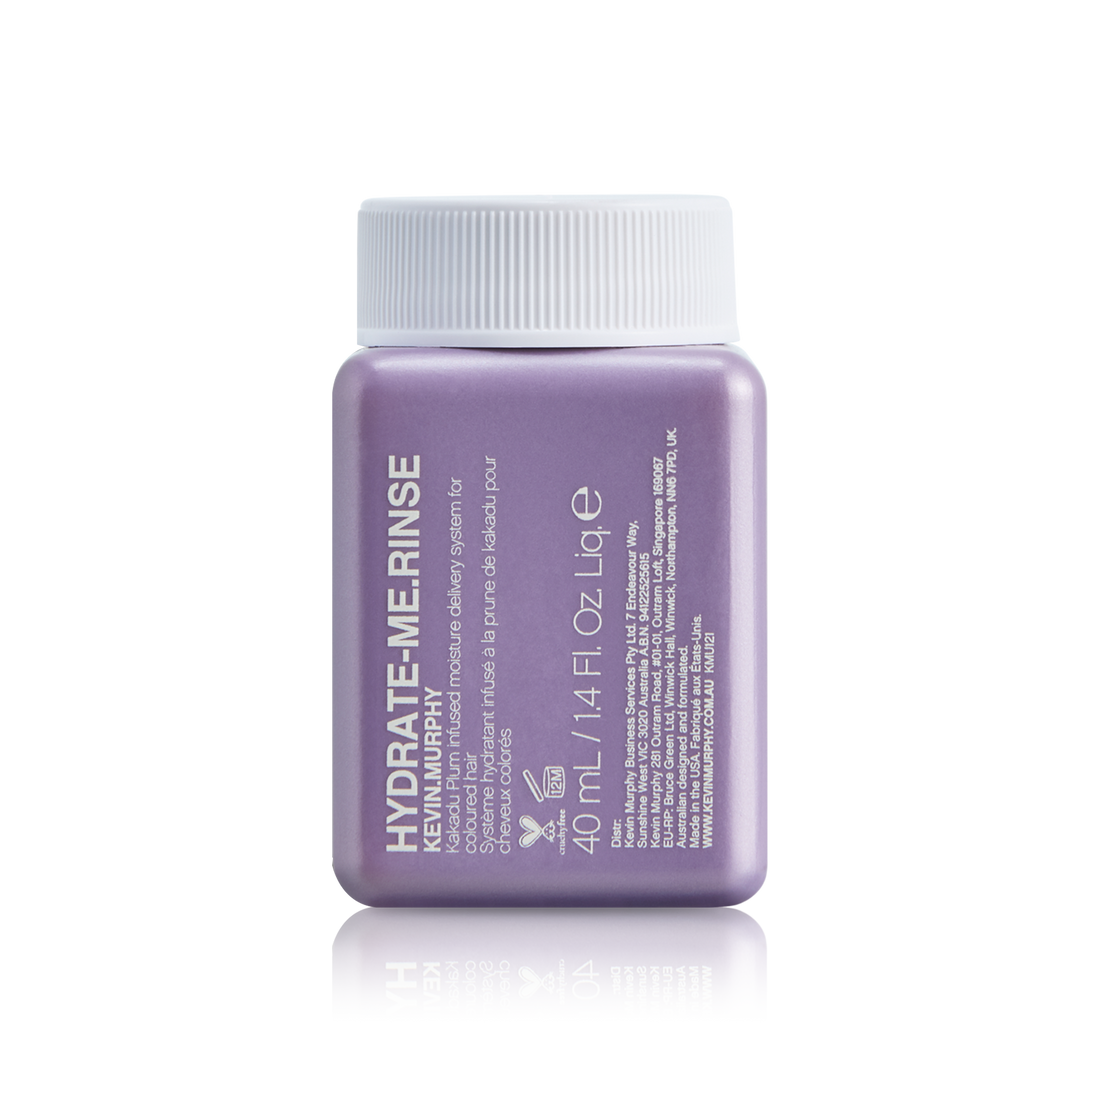 Hydrate-Me.Rinse Kakadu Plum Infused Moisture Delivery System For Coloured Hair